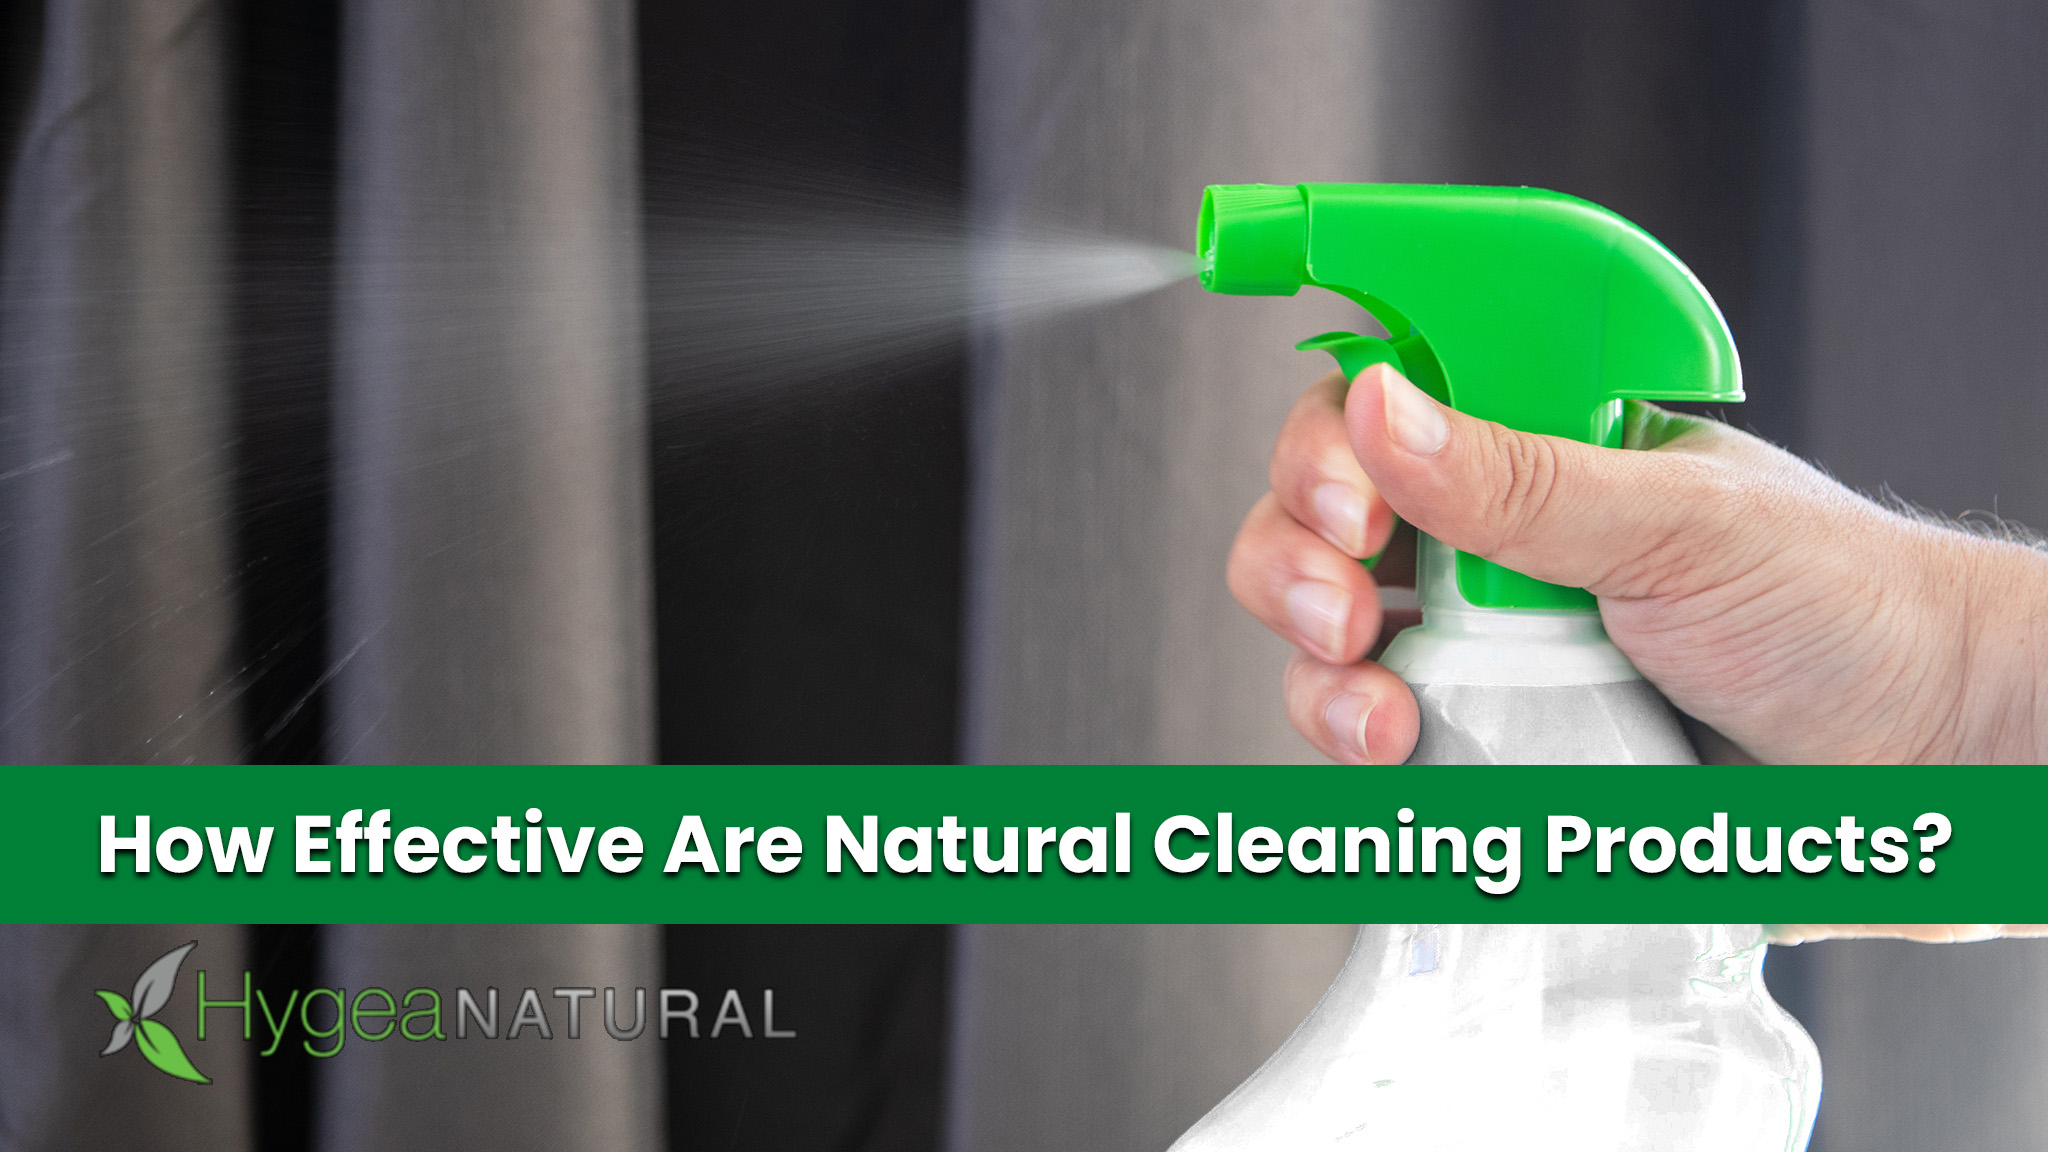 Green Cleaning Myths Debunked: What Really Works